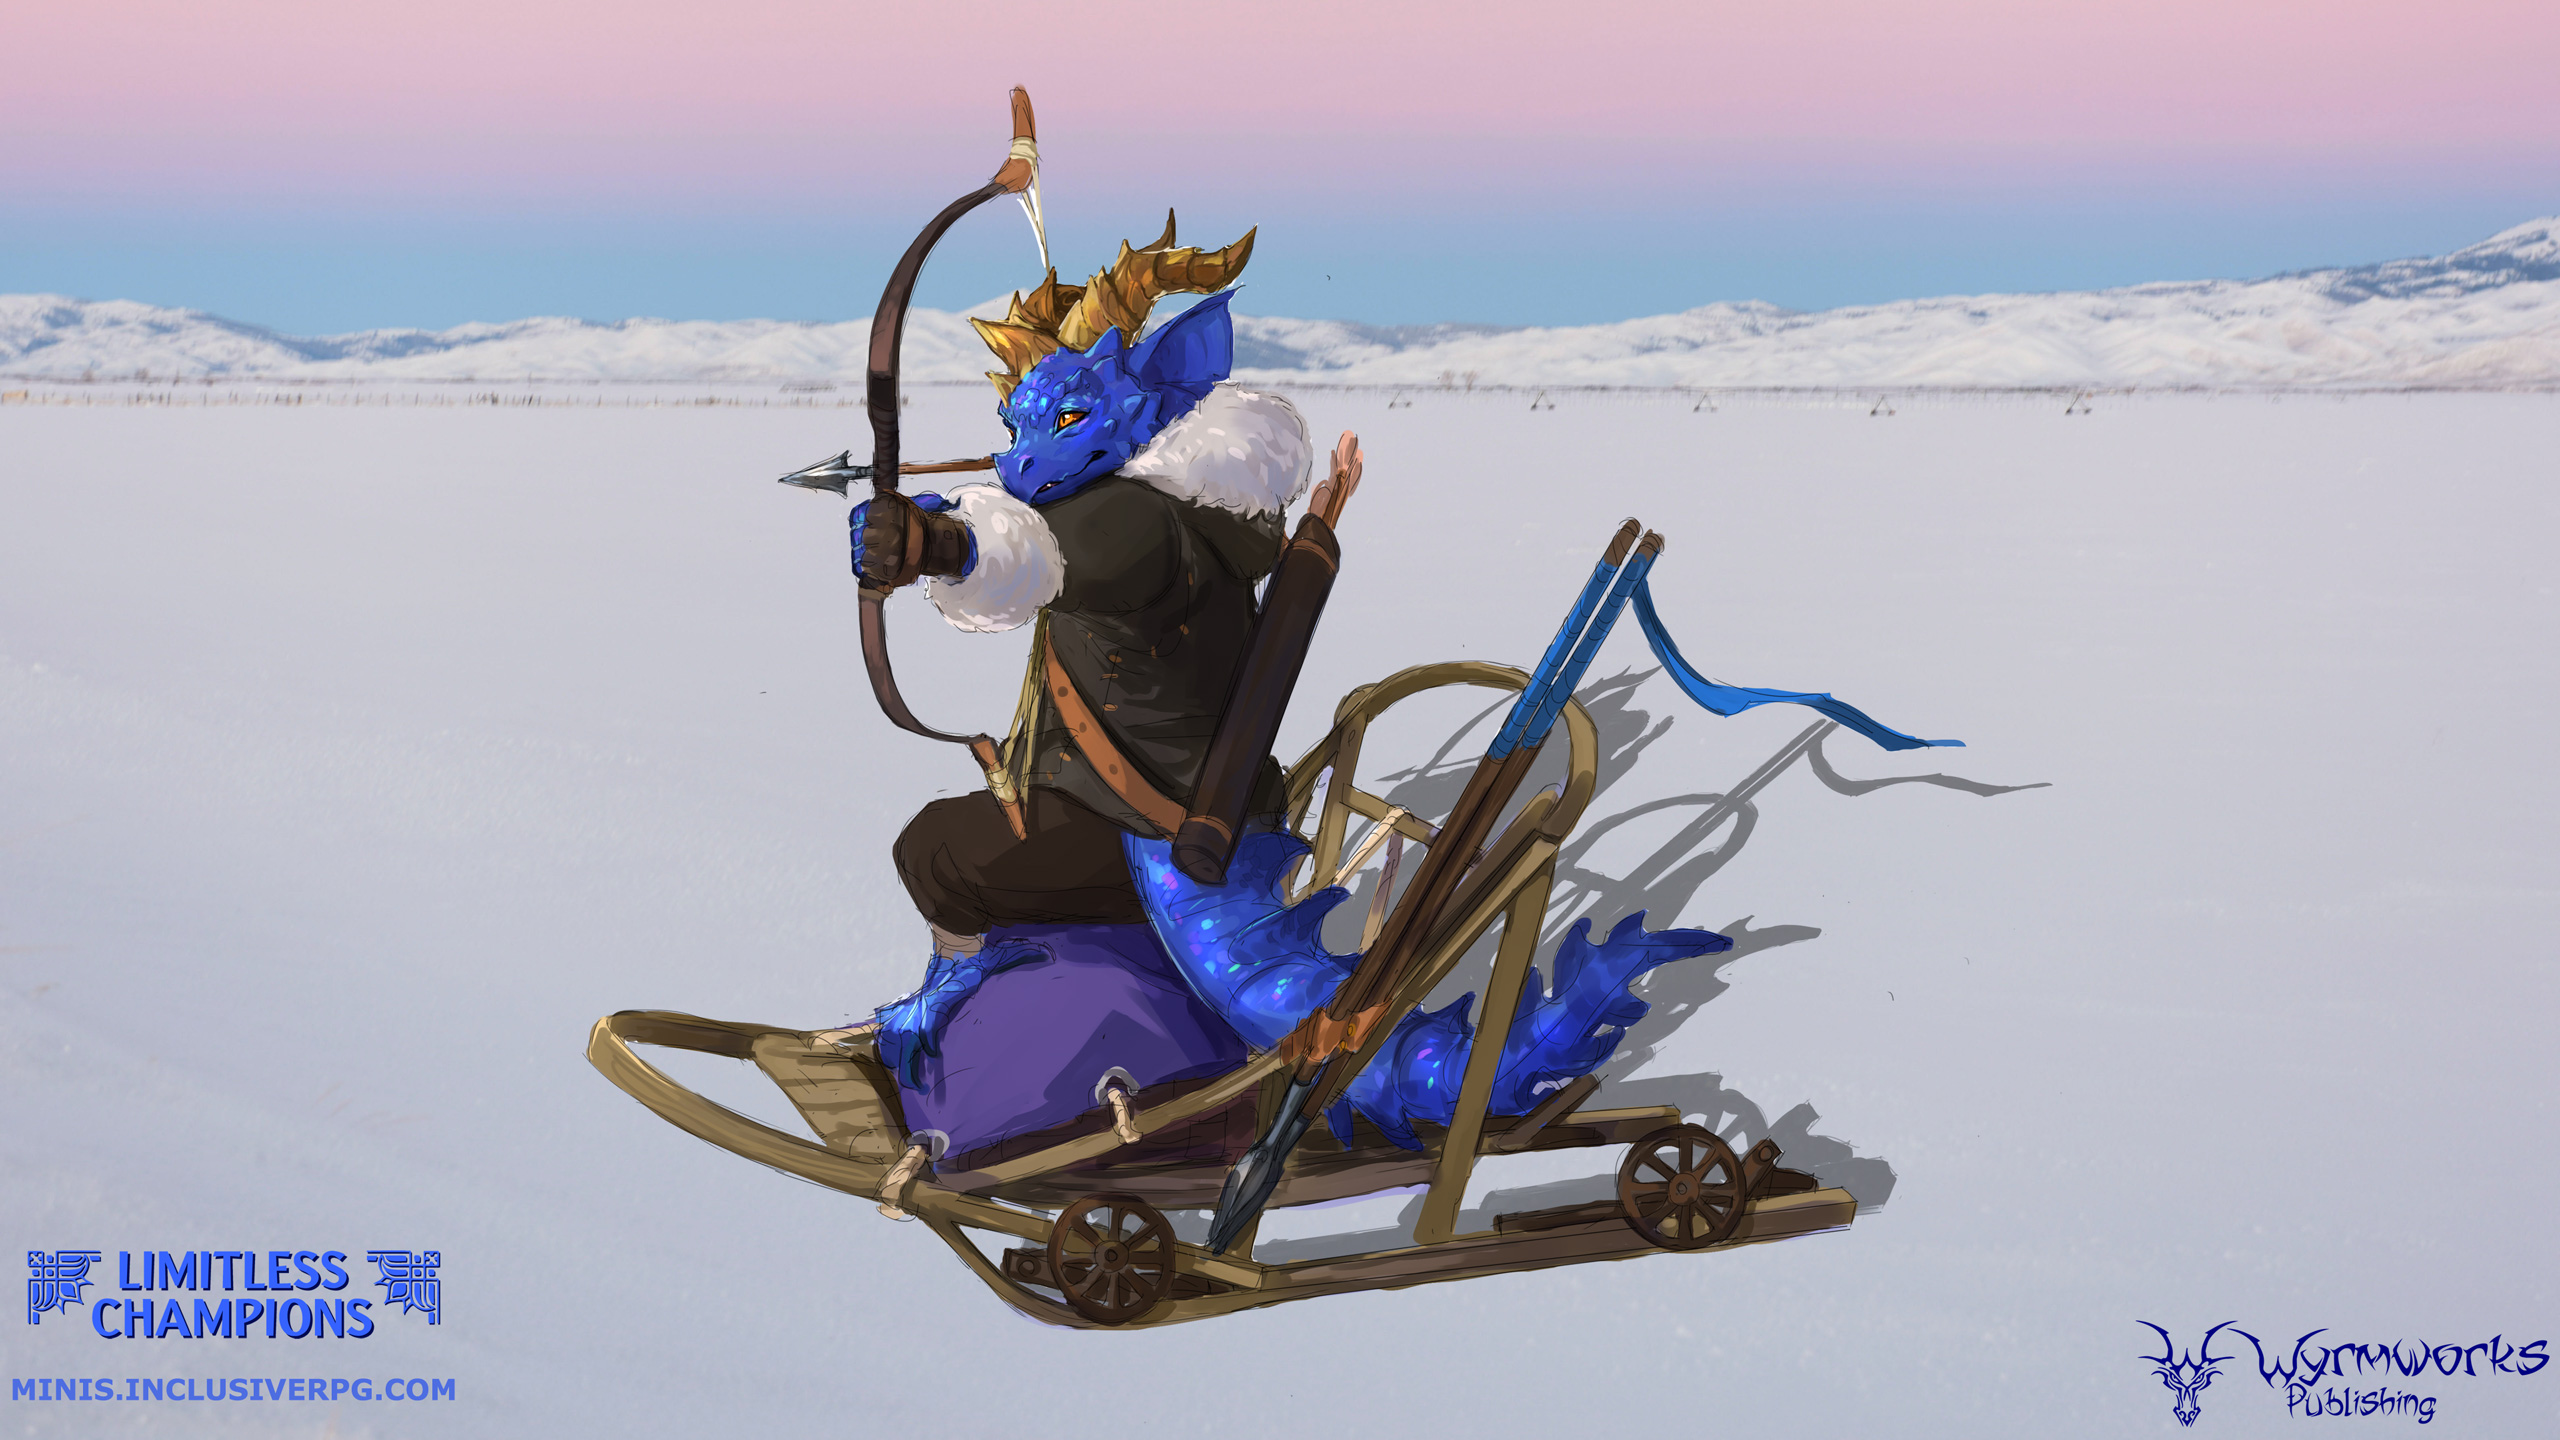 Blue dragonborn with dwarfism sitting on a sack in a wheeled sled aiming a shortbow, 2 javelins in sled on snow, sunset background